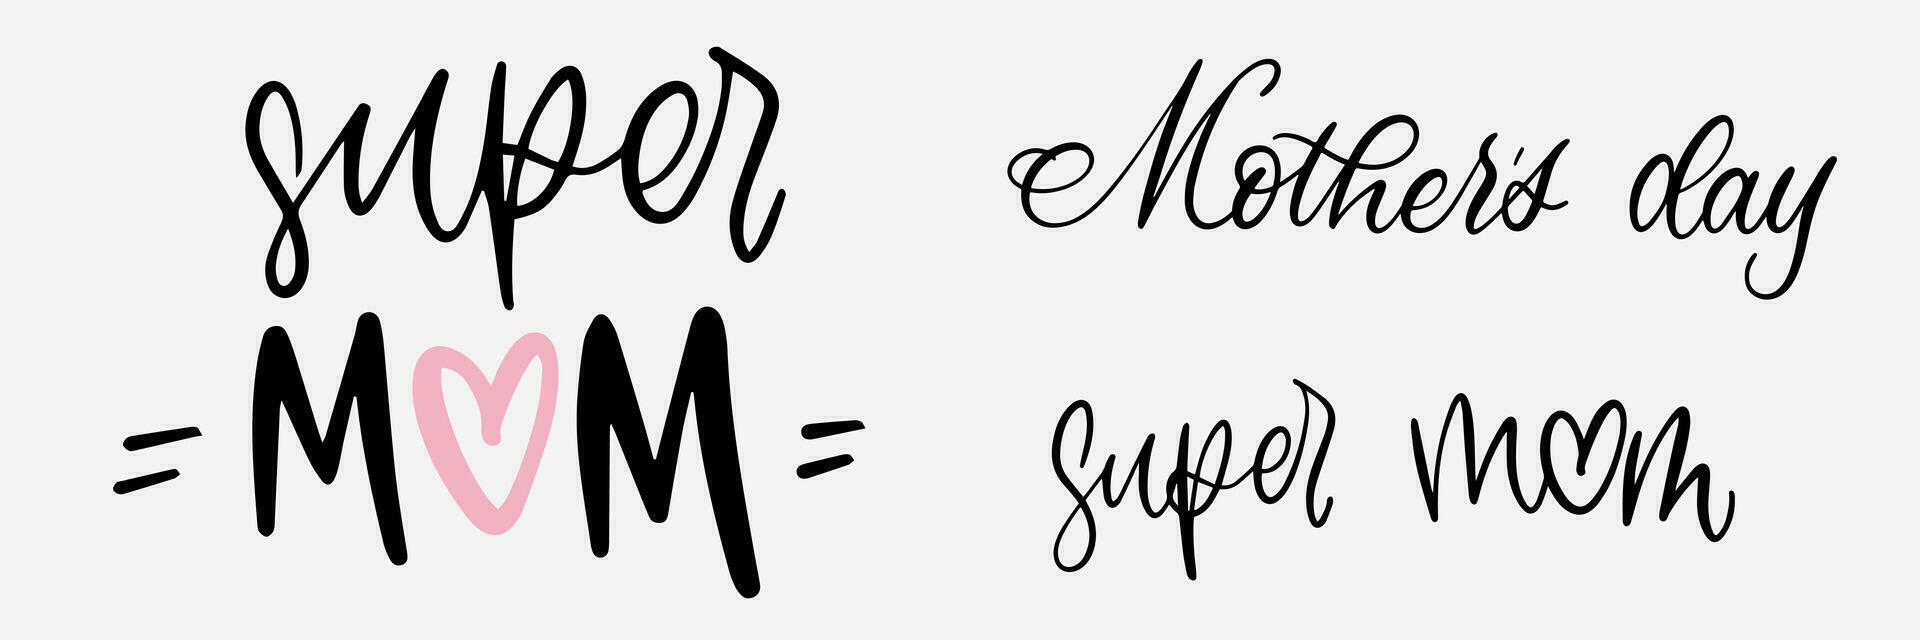 Happy mothers day. Mother day lettering style. Mom holiday. Handwritten celebration text with heart shape. Mama holiday text in lettering vector